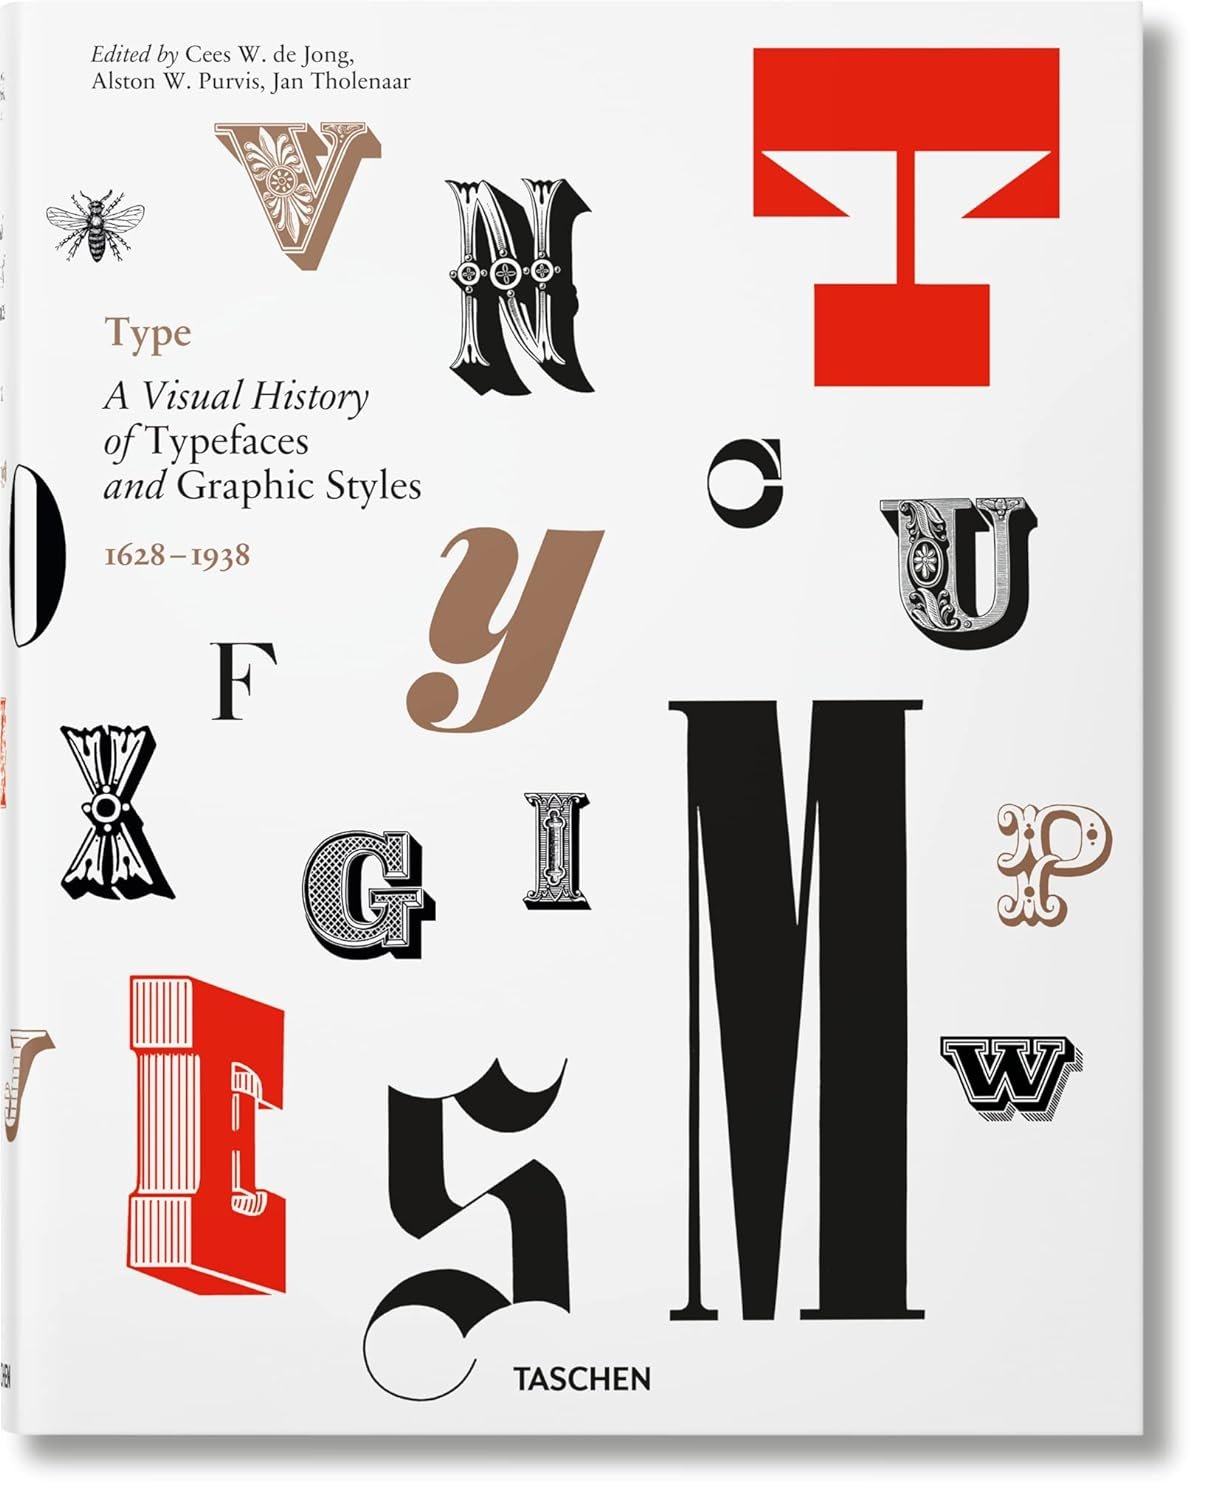 Type: A Visual History of Typefaces and Graphic Styles 1628-1938